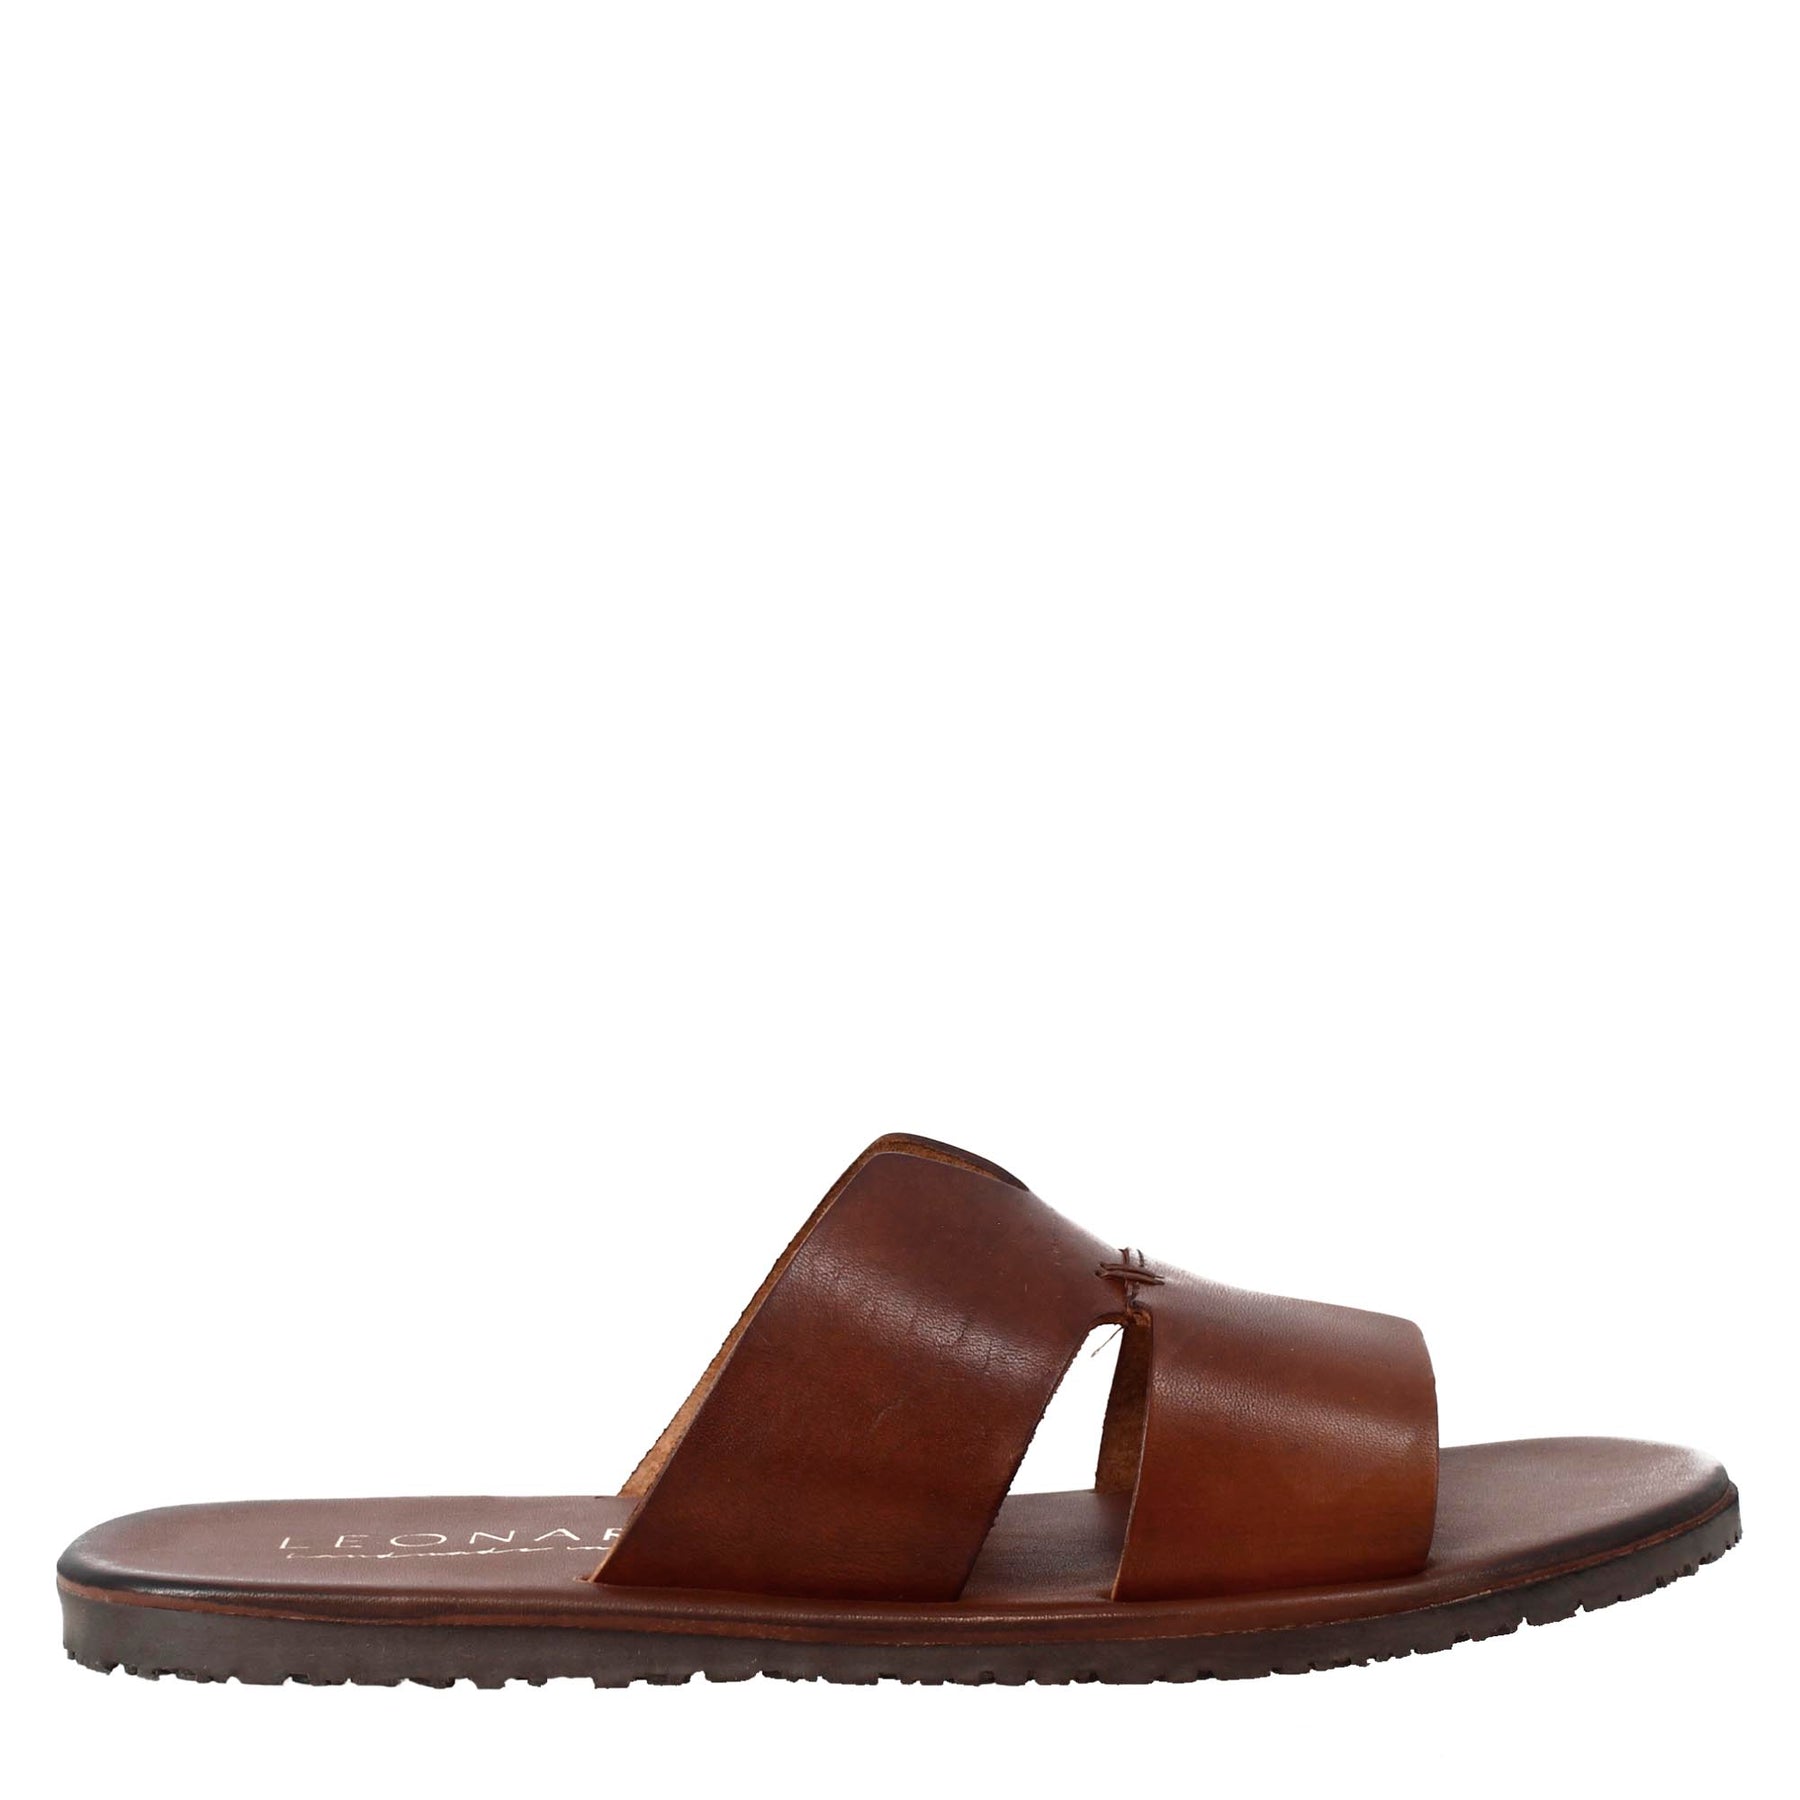 FLAT CROSSED LEATHER SANDALS - Brown | ZARA United States